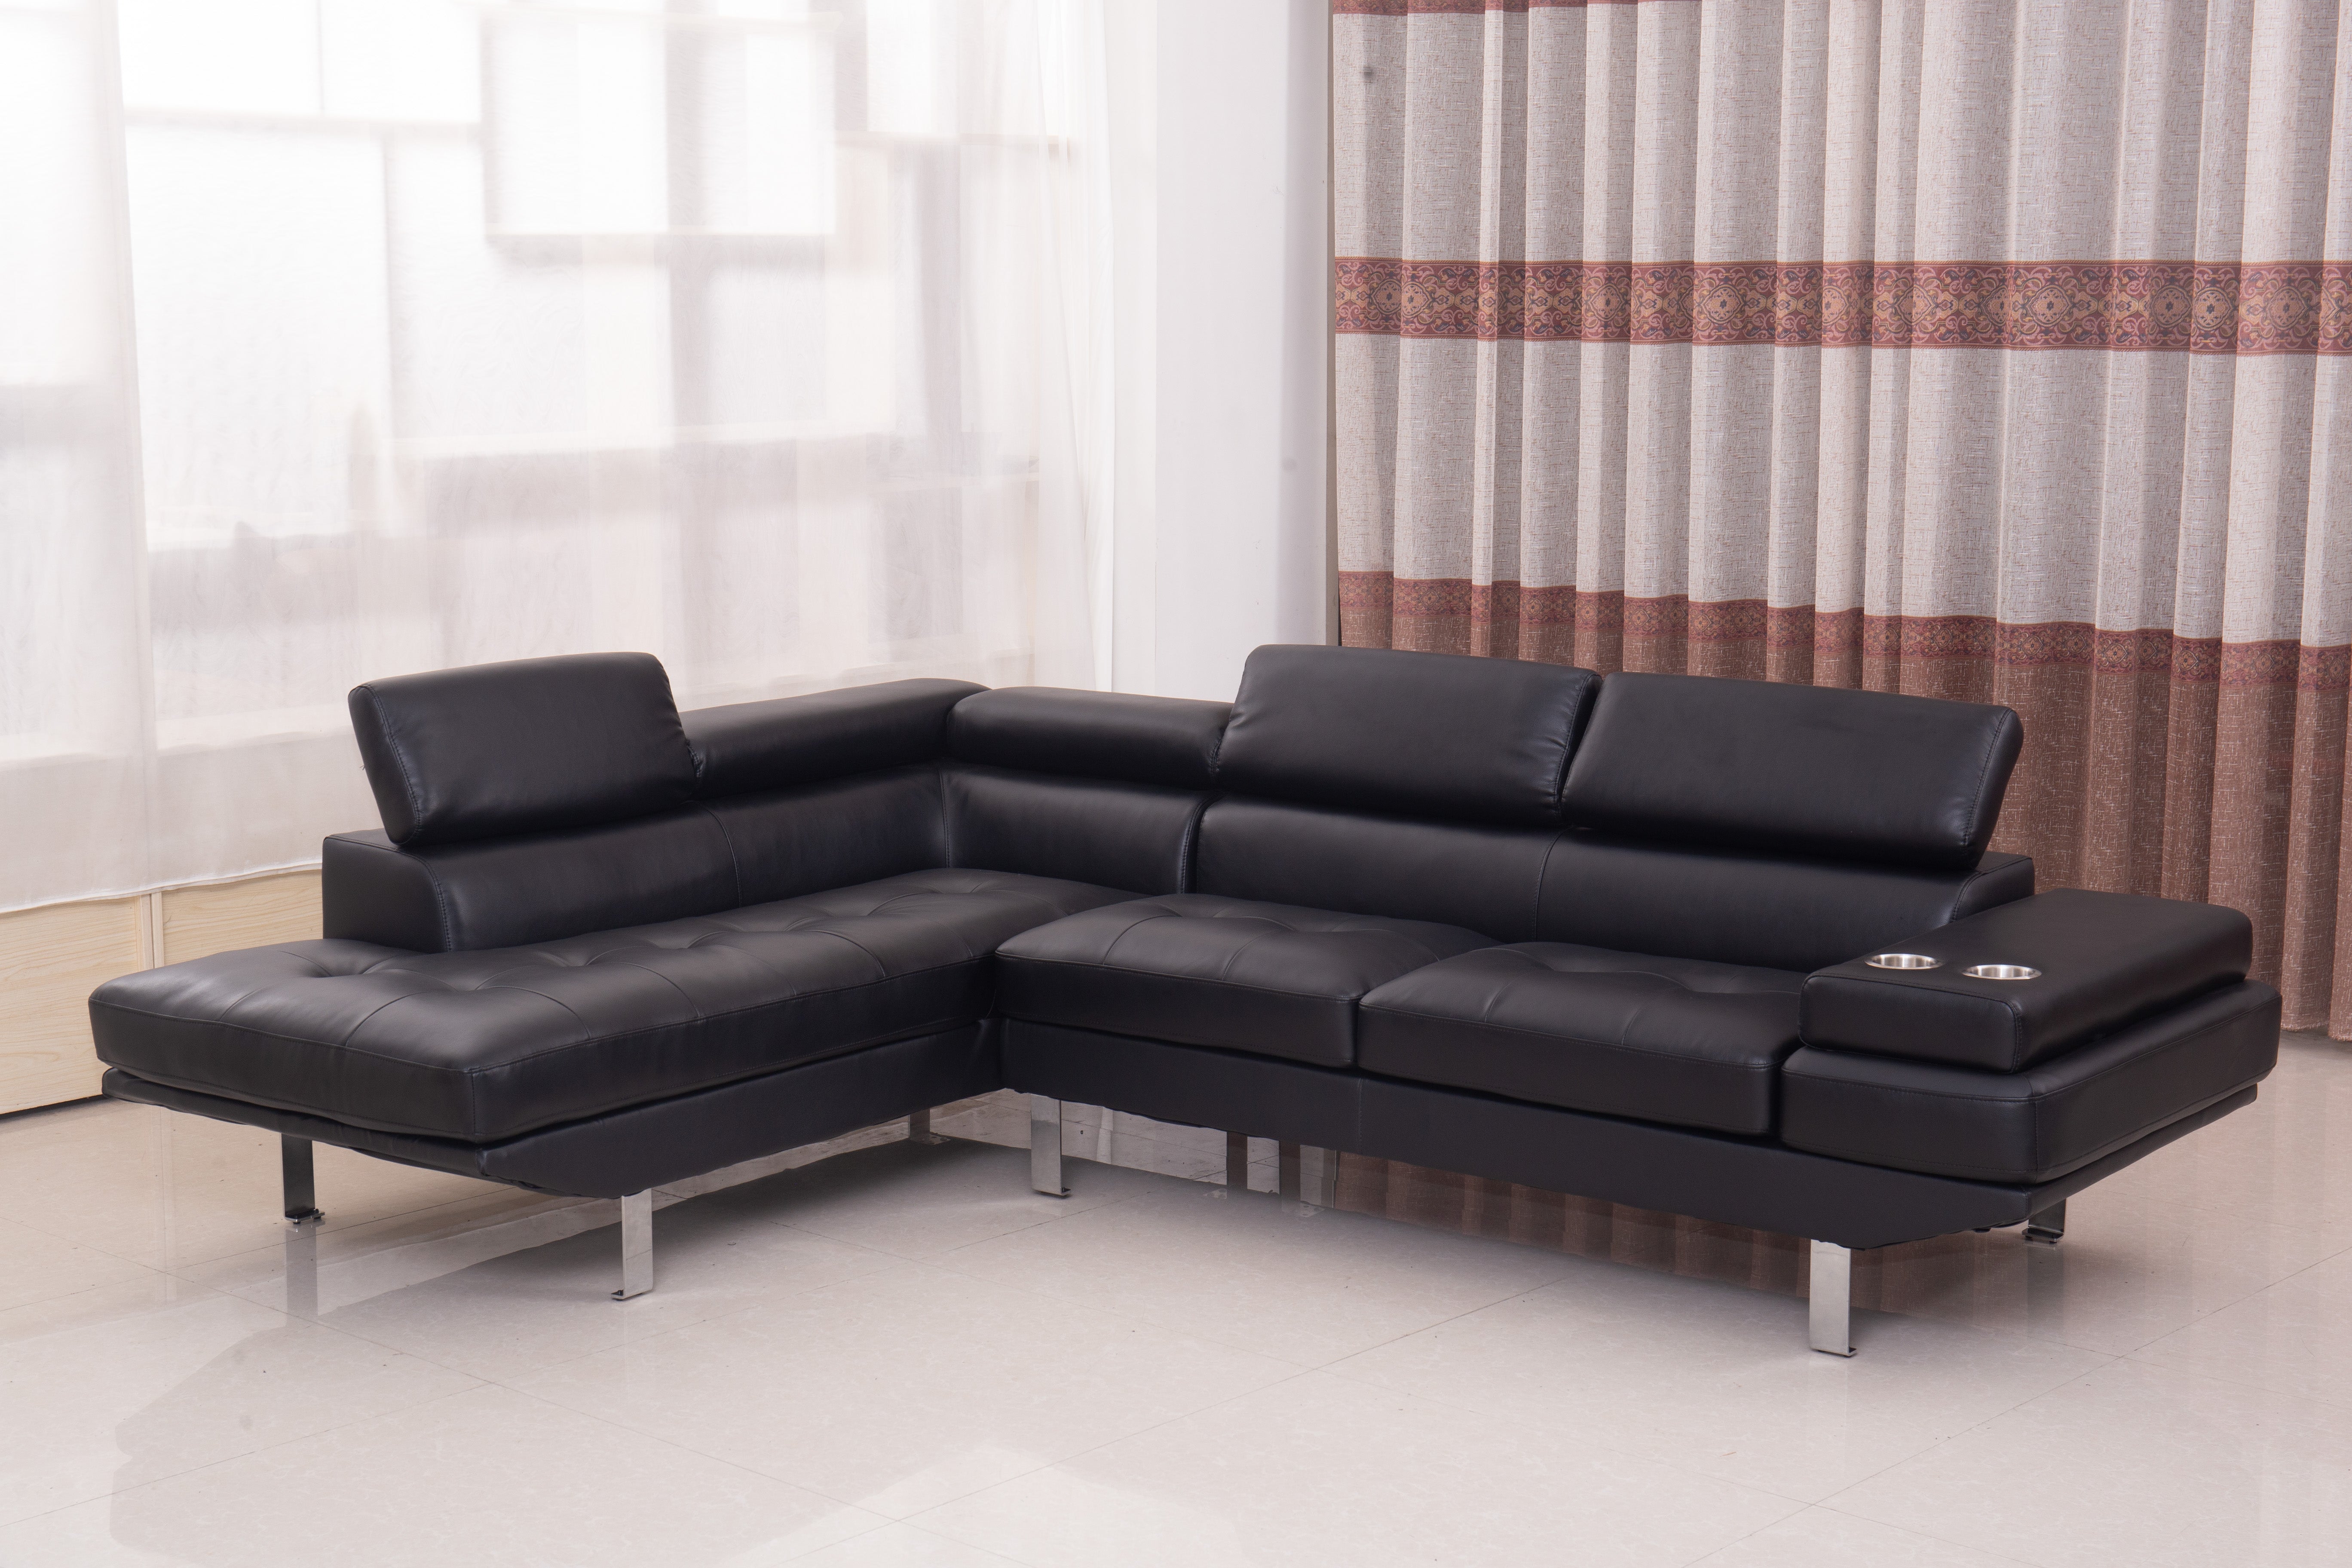 Reversible Air Leather Sectional Sofa